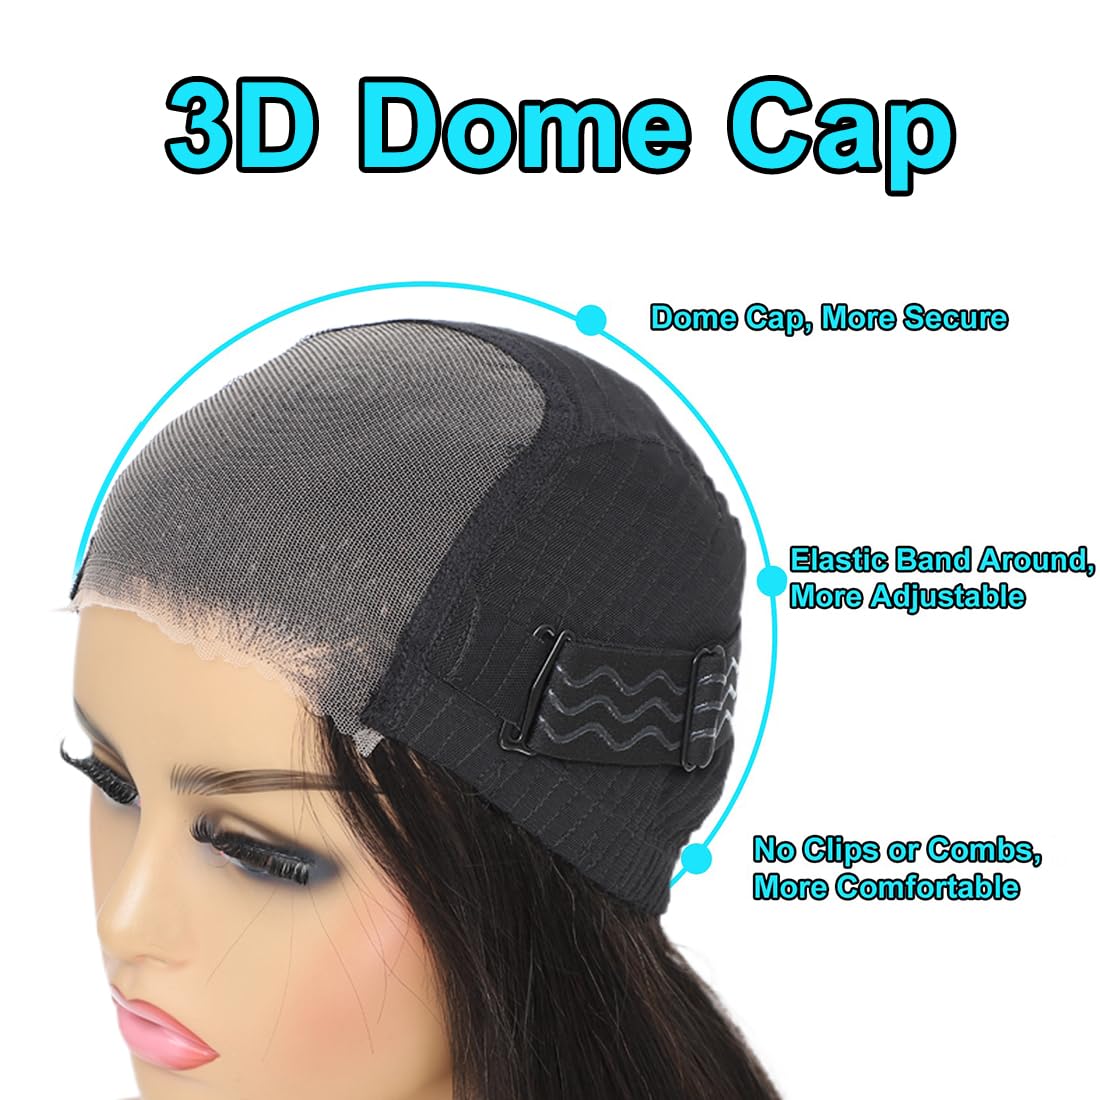 Dome cap for enhanced security. 